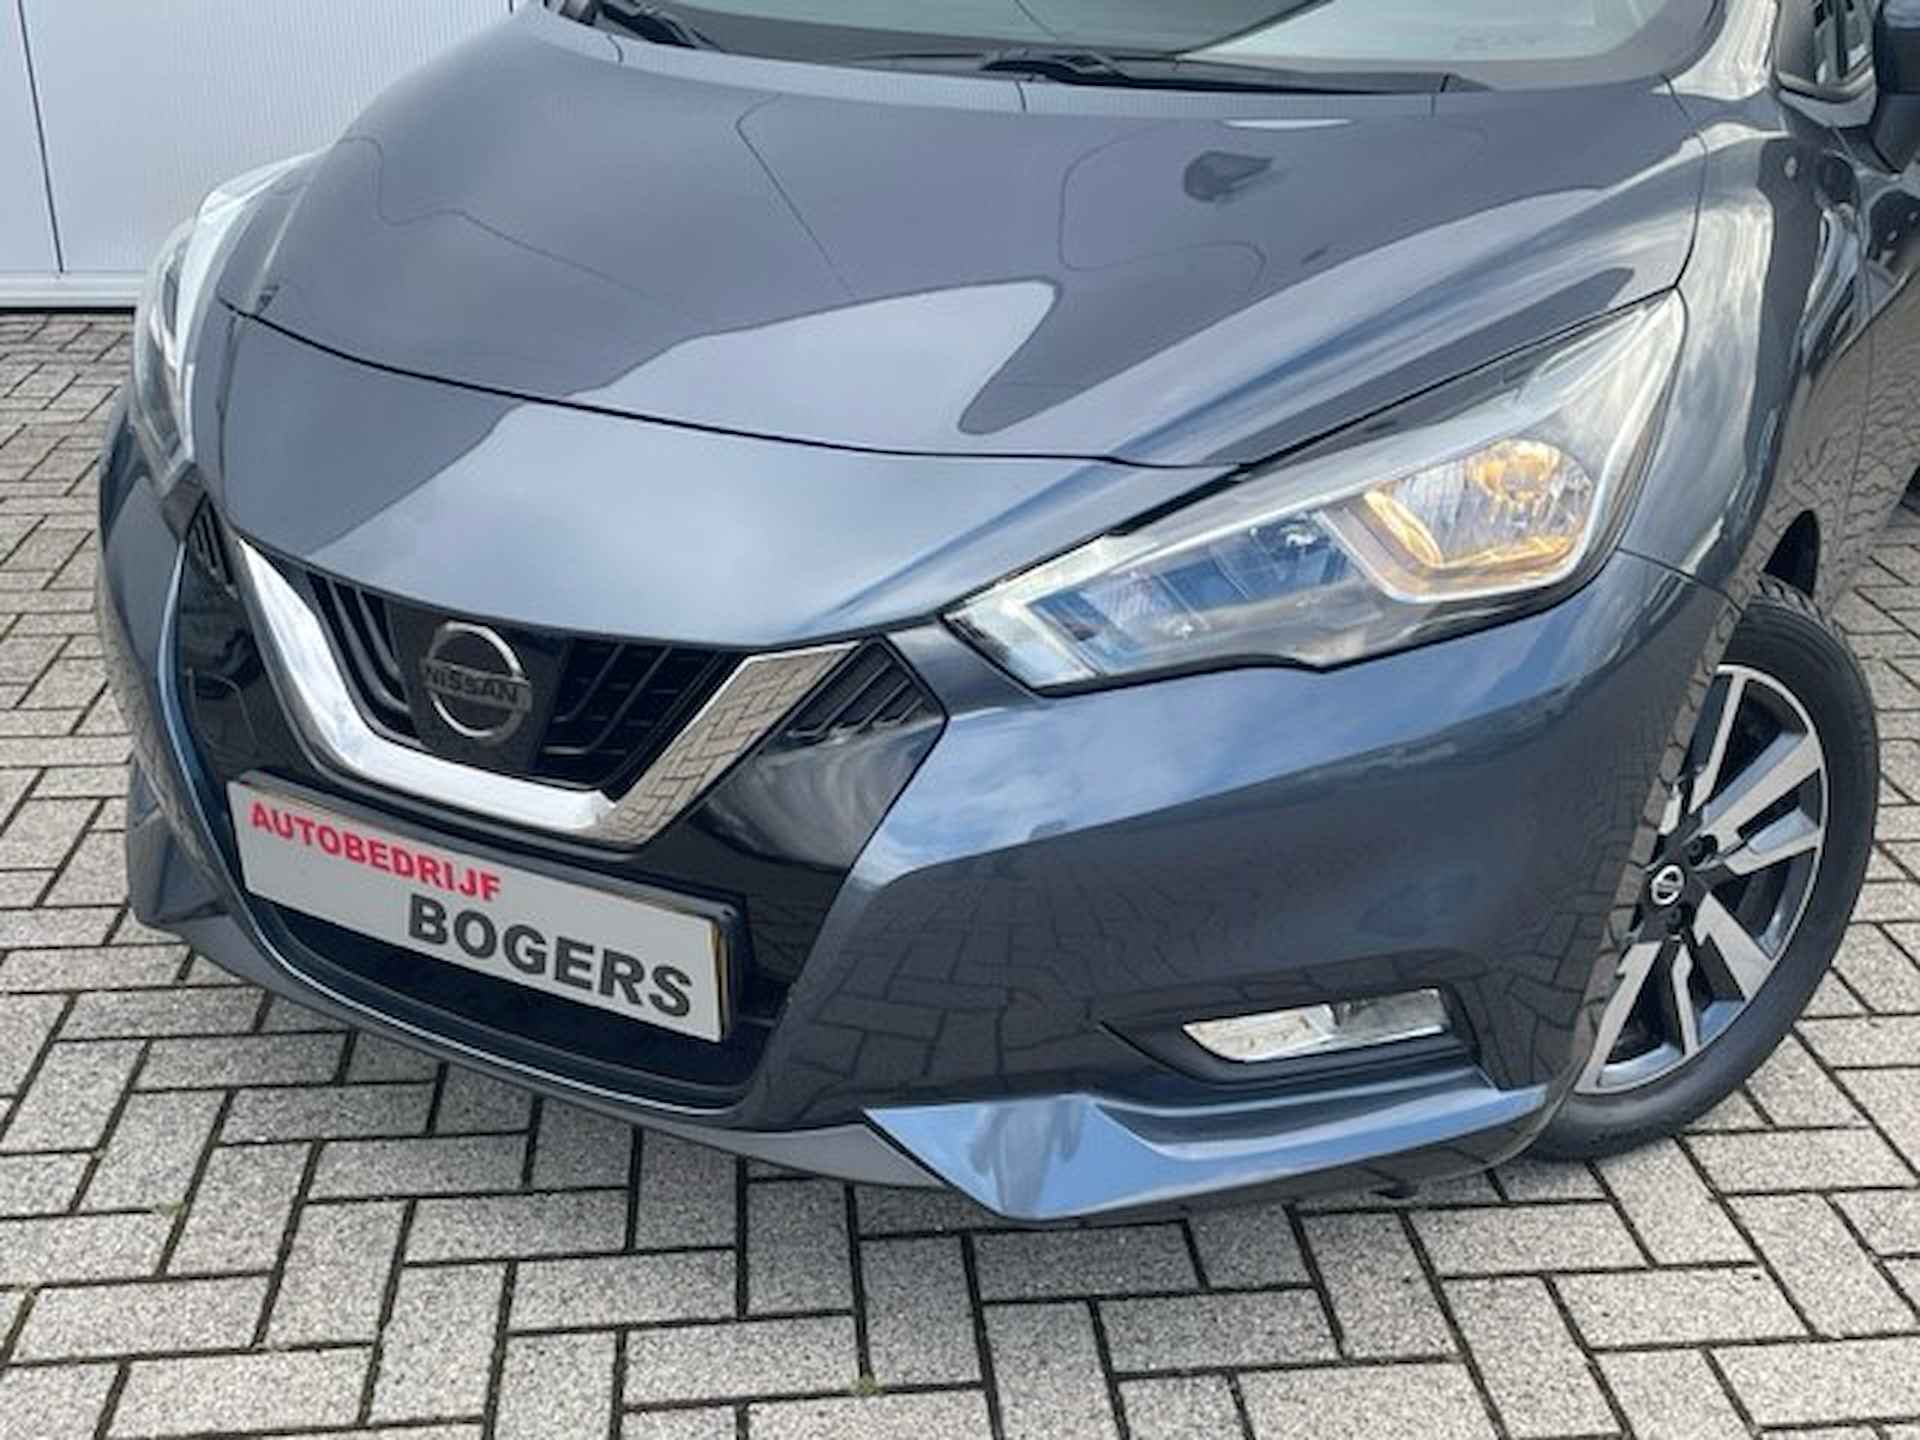 Nissan Micra 1.0 IG-T N-Connecta Navigatie, Climate Control, Cruise Control, 16"Lm, Achteruitrijcamera - 4/19